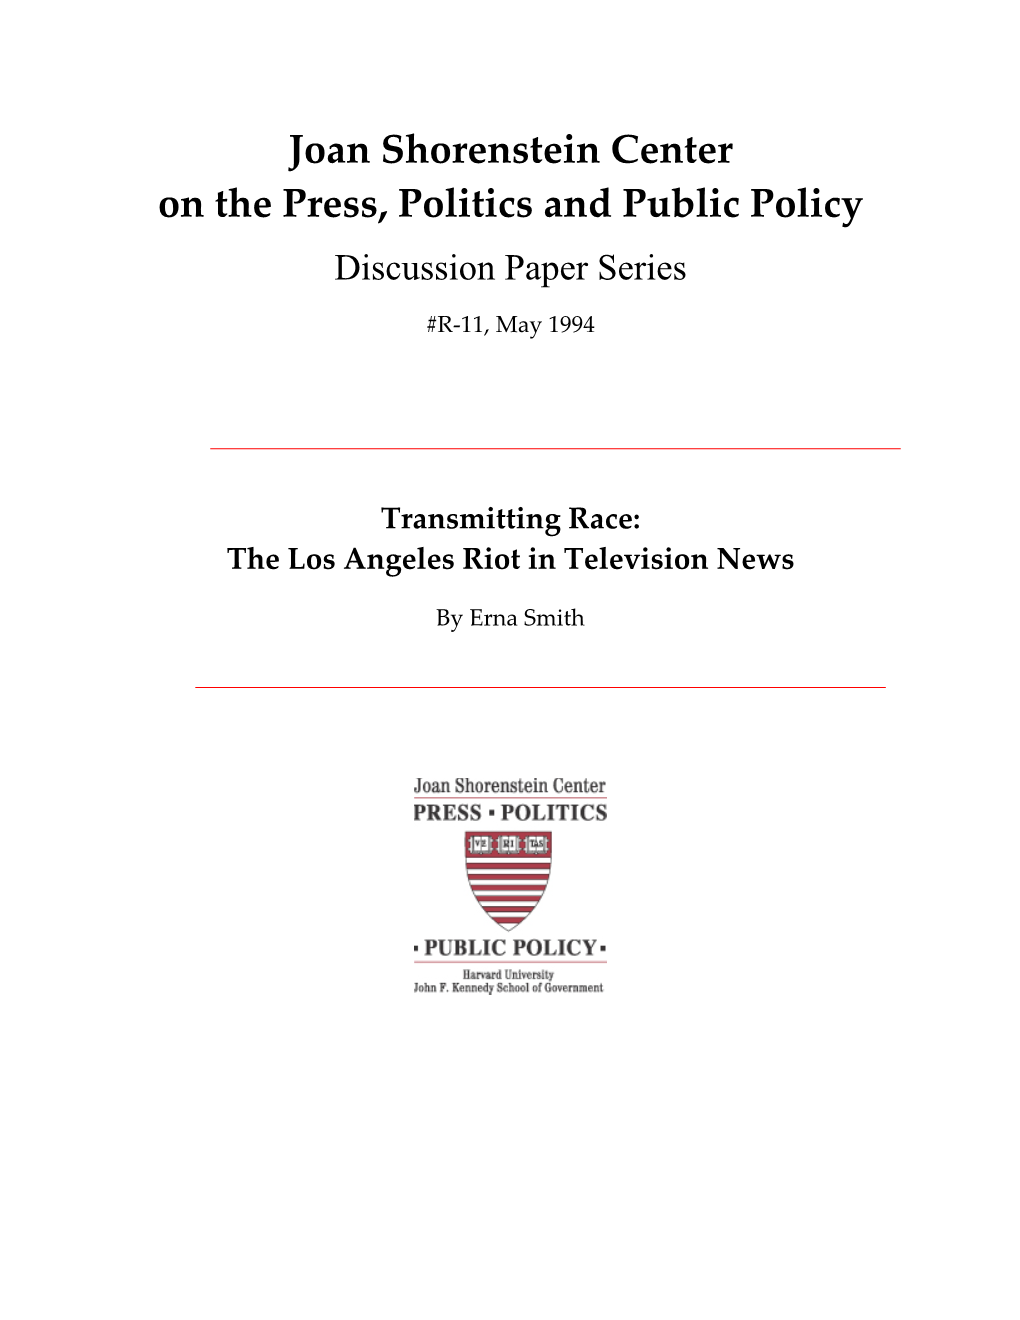 Joan Shorenstein Center on the Press, Politics and Public Policy Discussion Paper Series